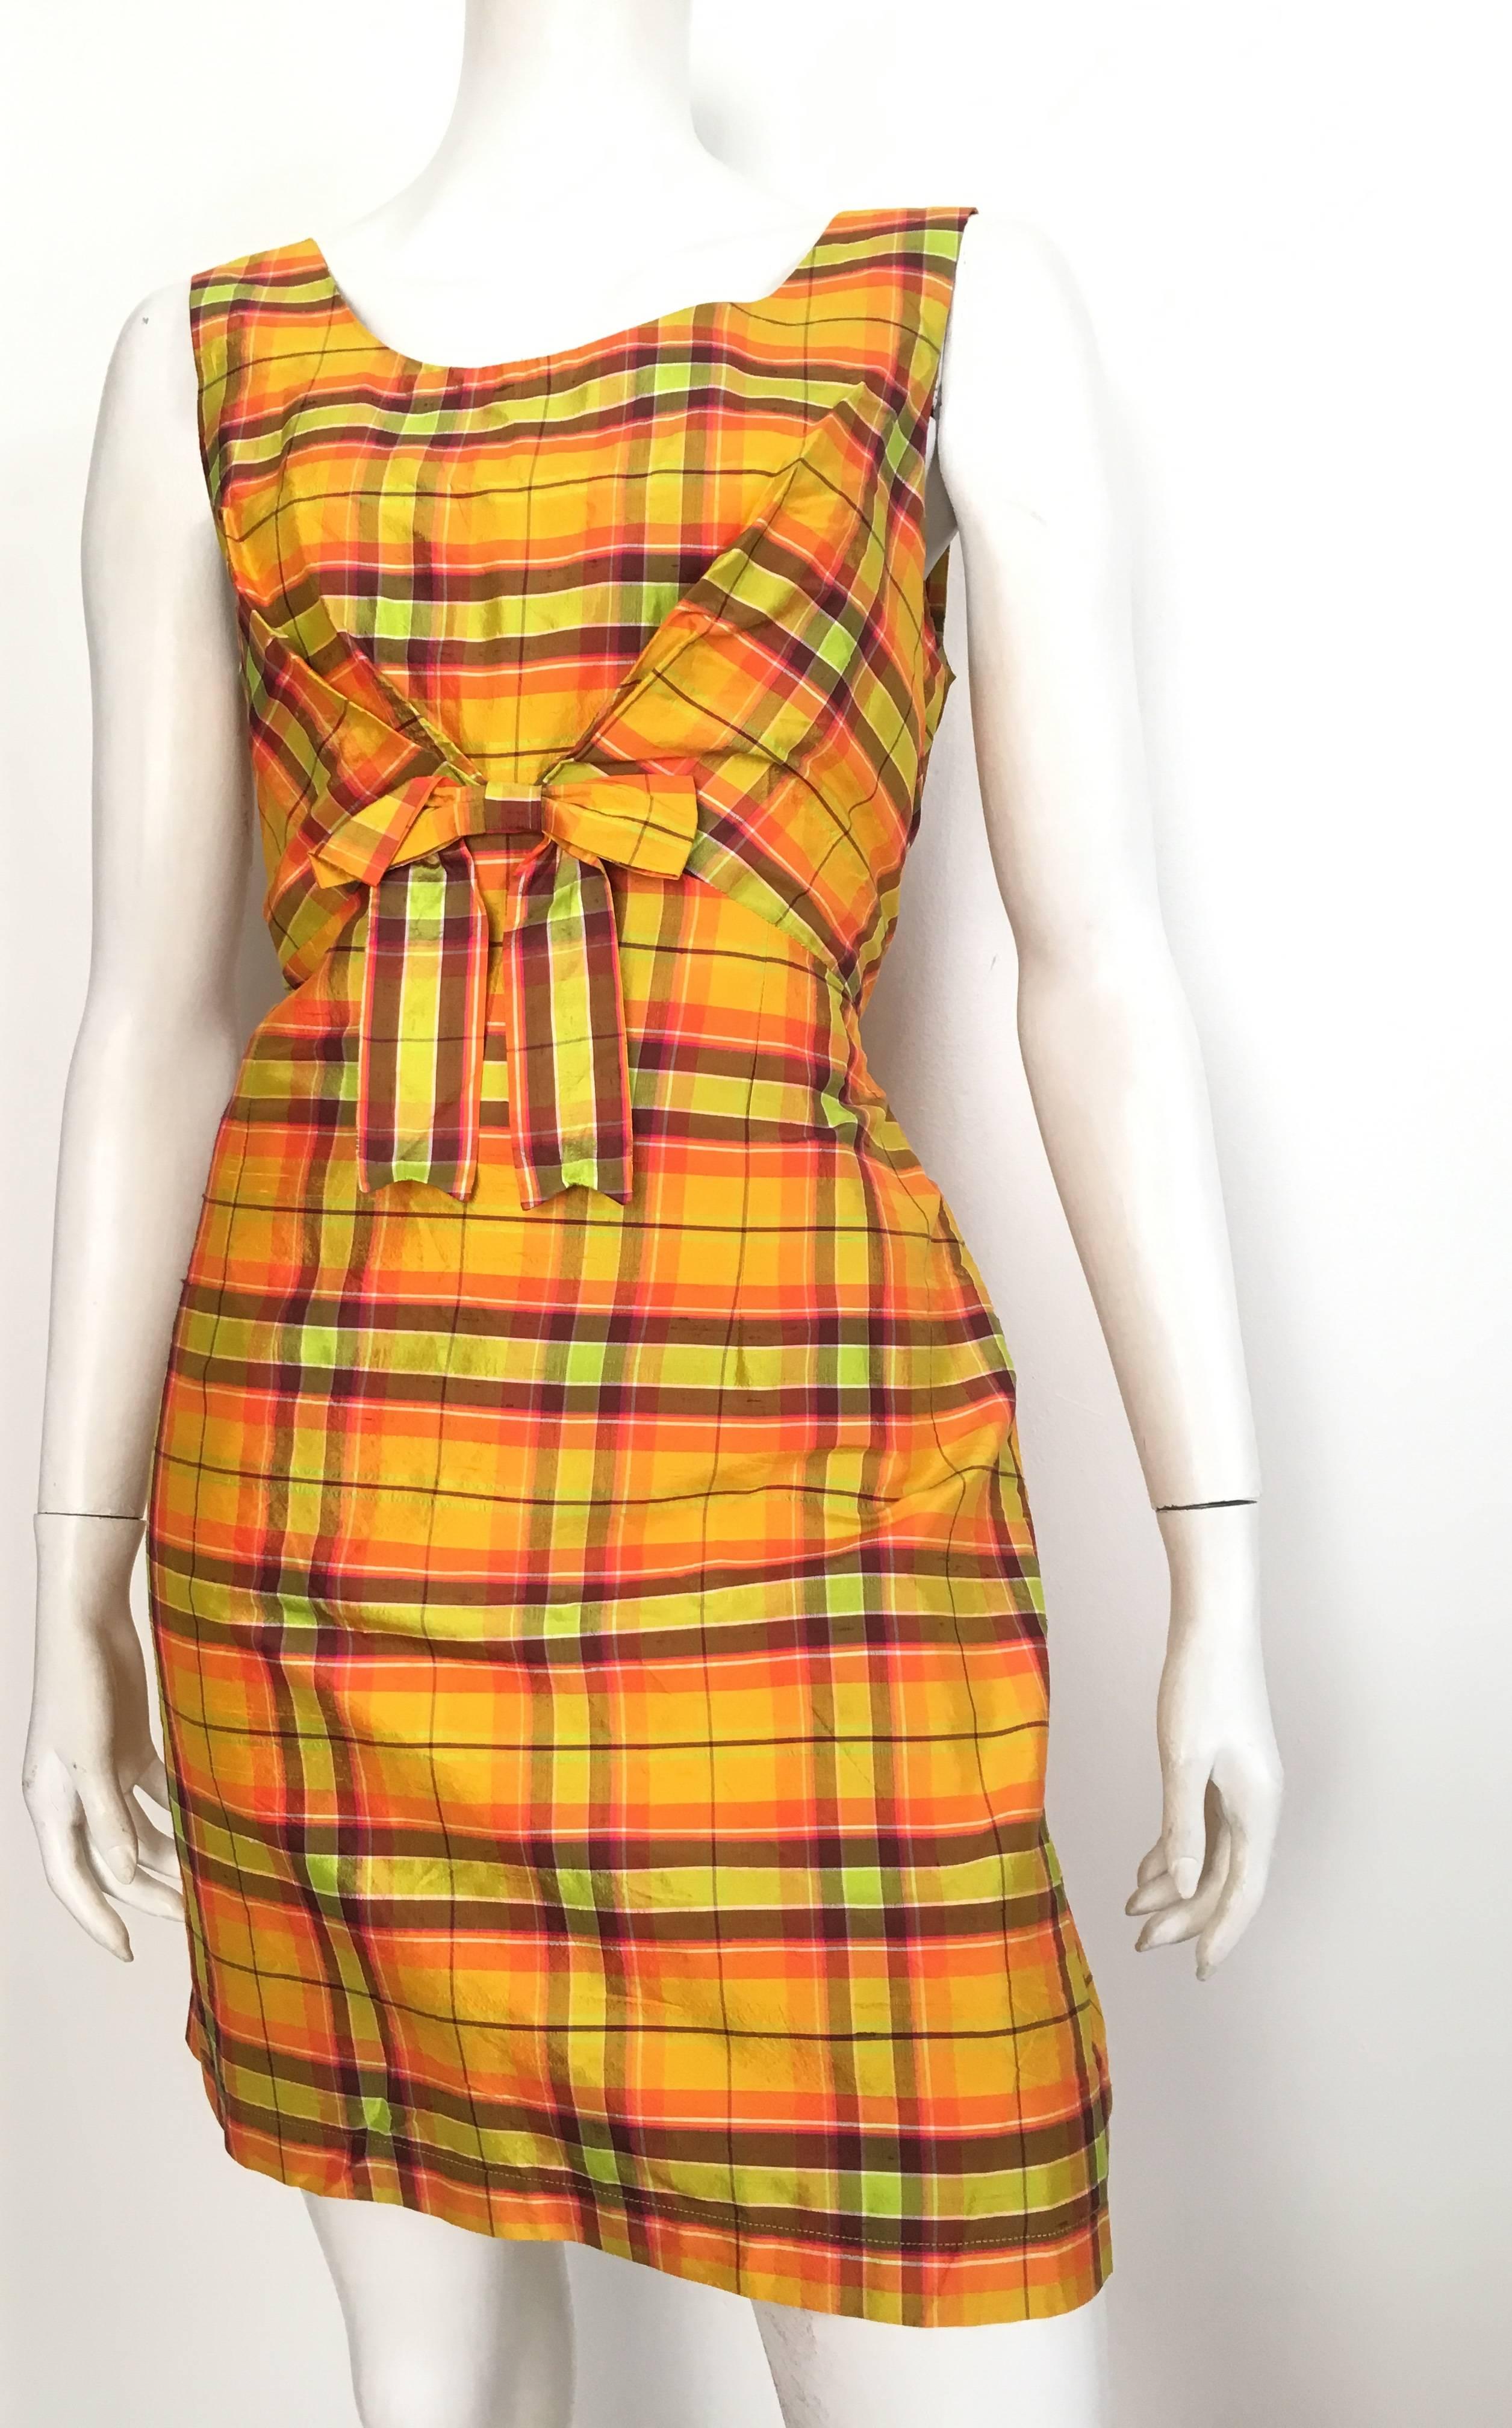 Moschino Jeans 1990 silk plaid sleeveless dress with front bow is labeled a USA size 12 but fits more like a size 10.  The waist on this dress is 31.1/2" so please grab your tape measure so that you can measure your bust, waist & hips to